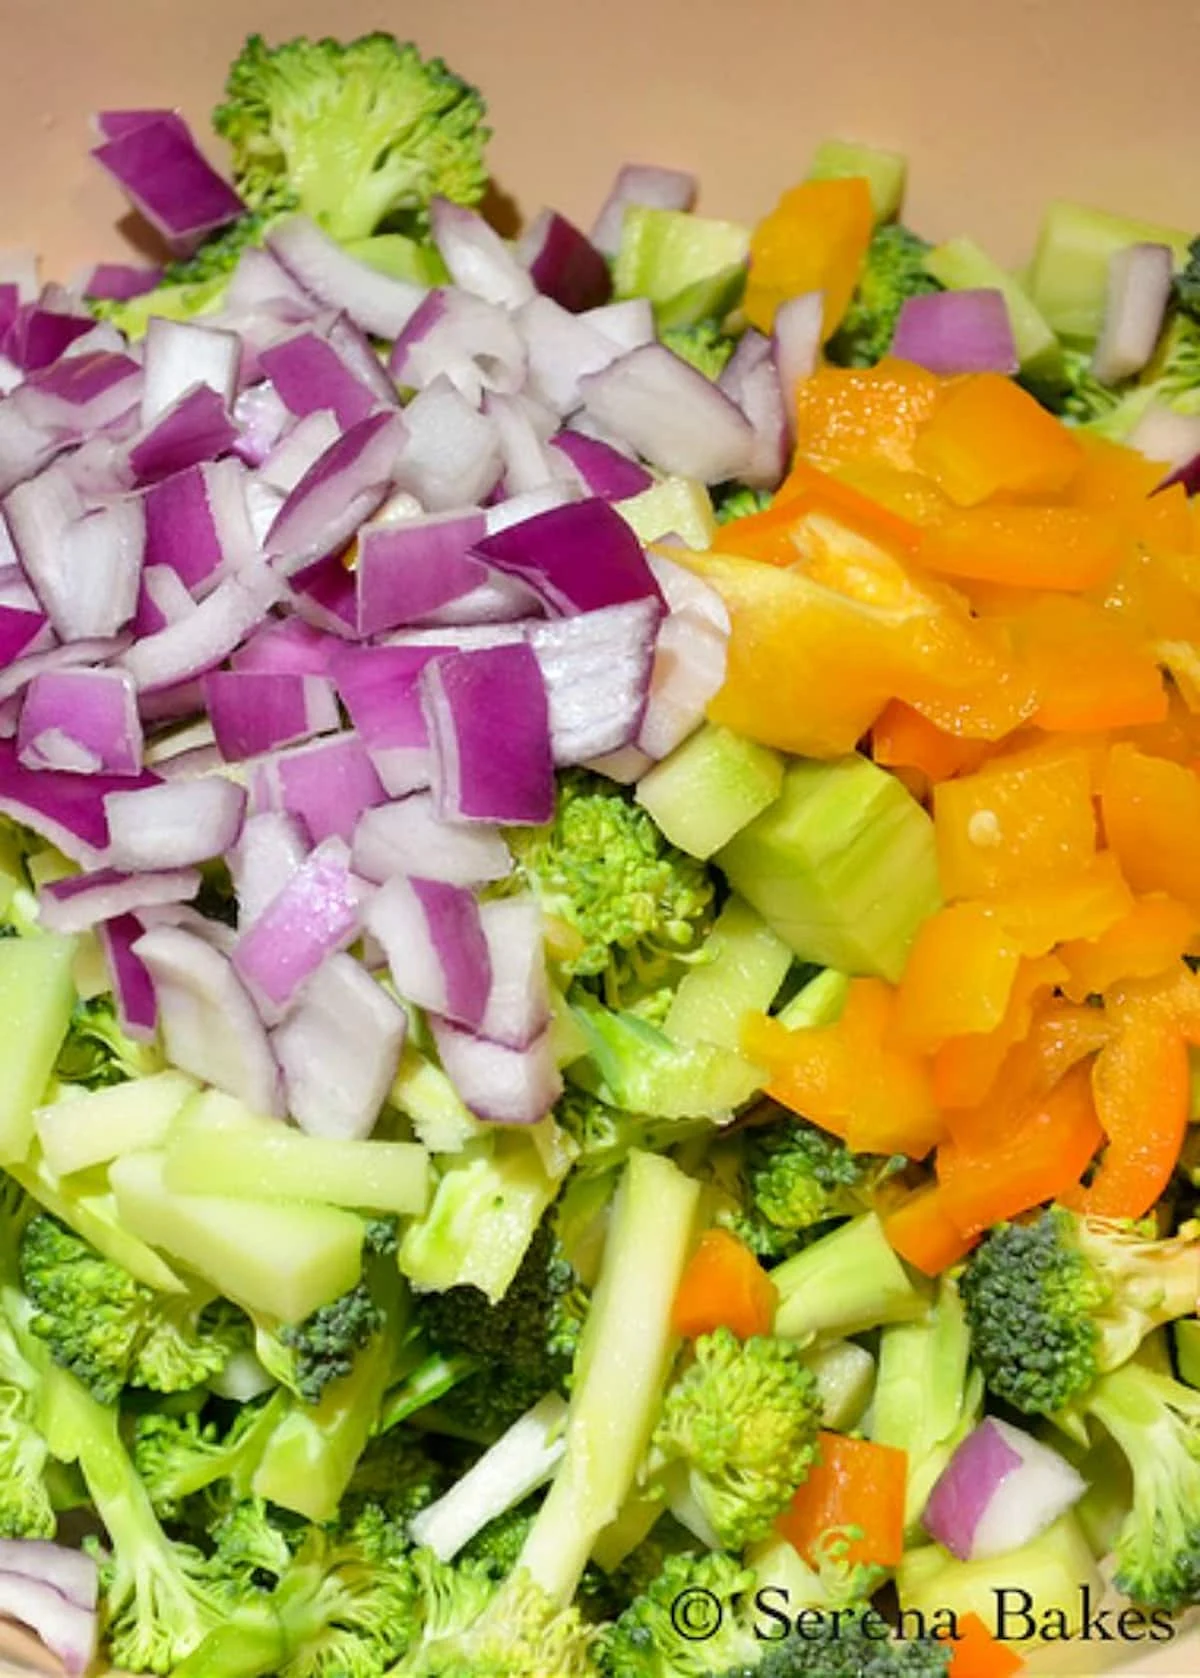 Chopped Broccoli, Red Onion and Diced Bell Pepper in a bowl.